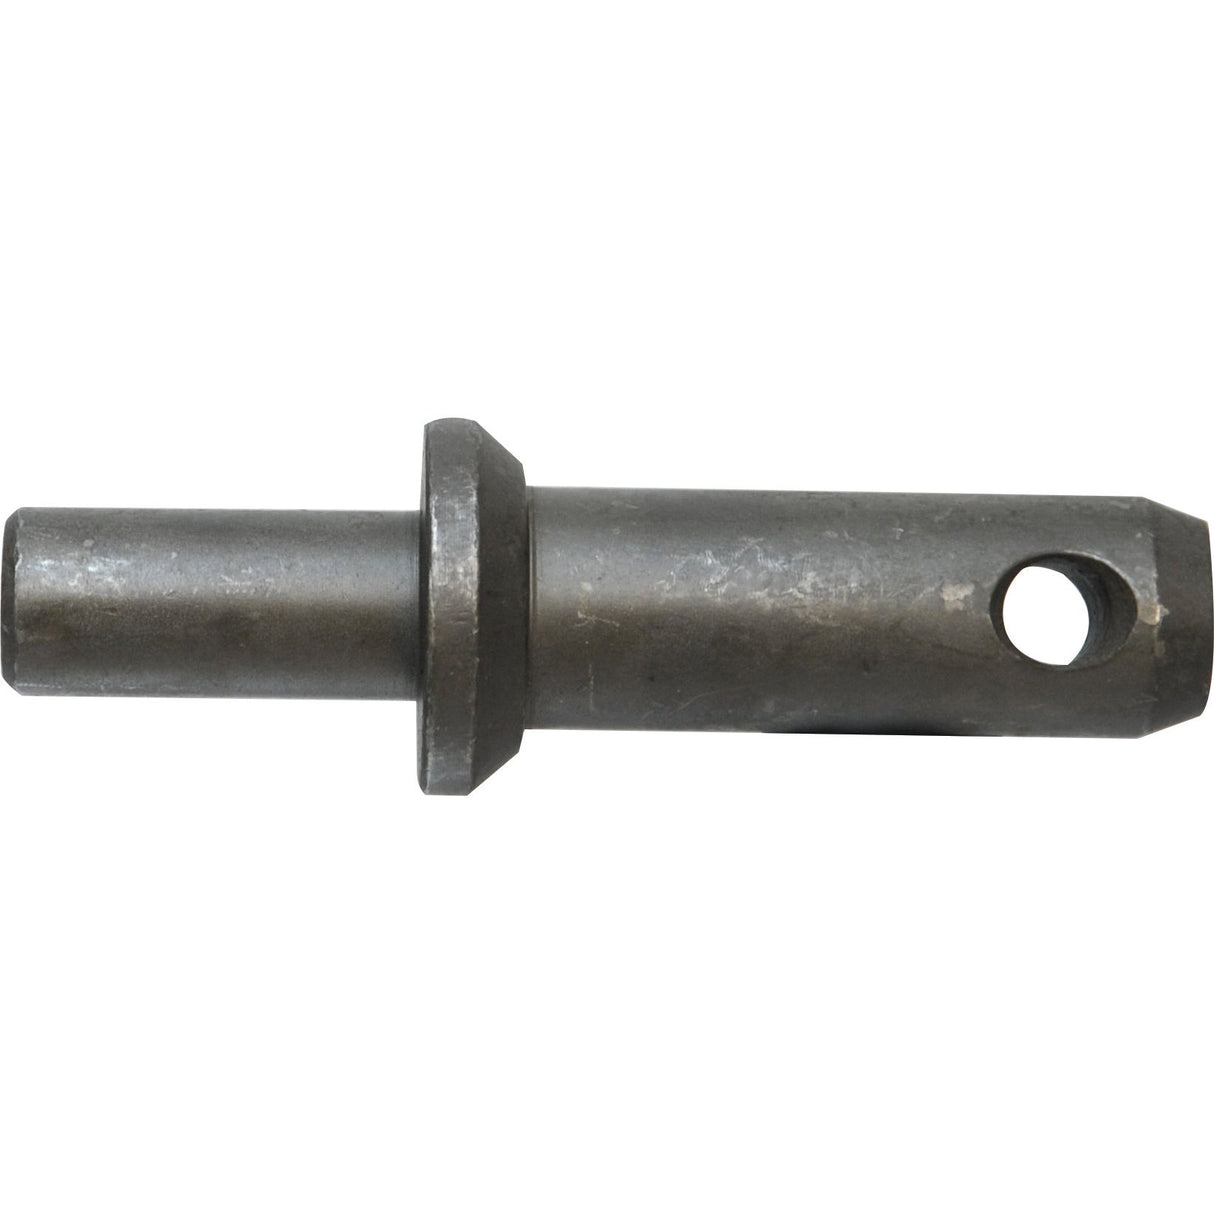 Lower Link Weld On Implement Mounting Pin 22x137mm Cat. 2
 - S.900506 - Massey Tractor Parts